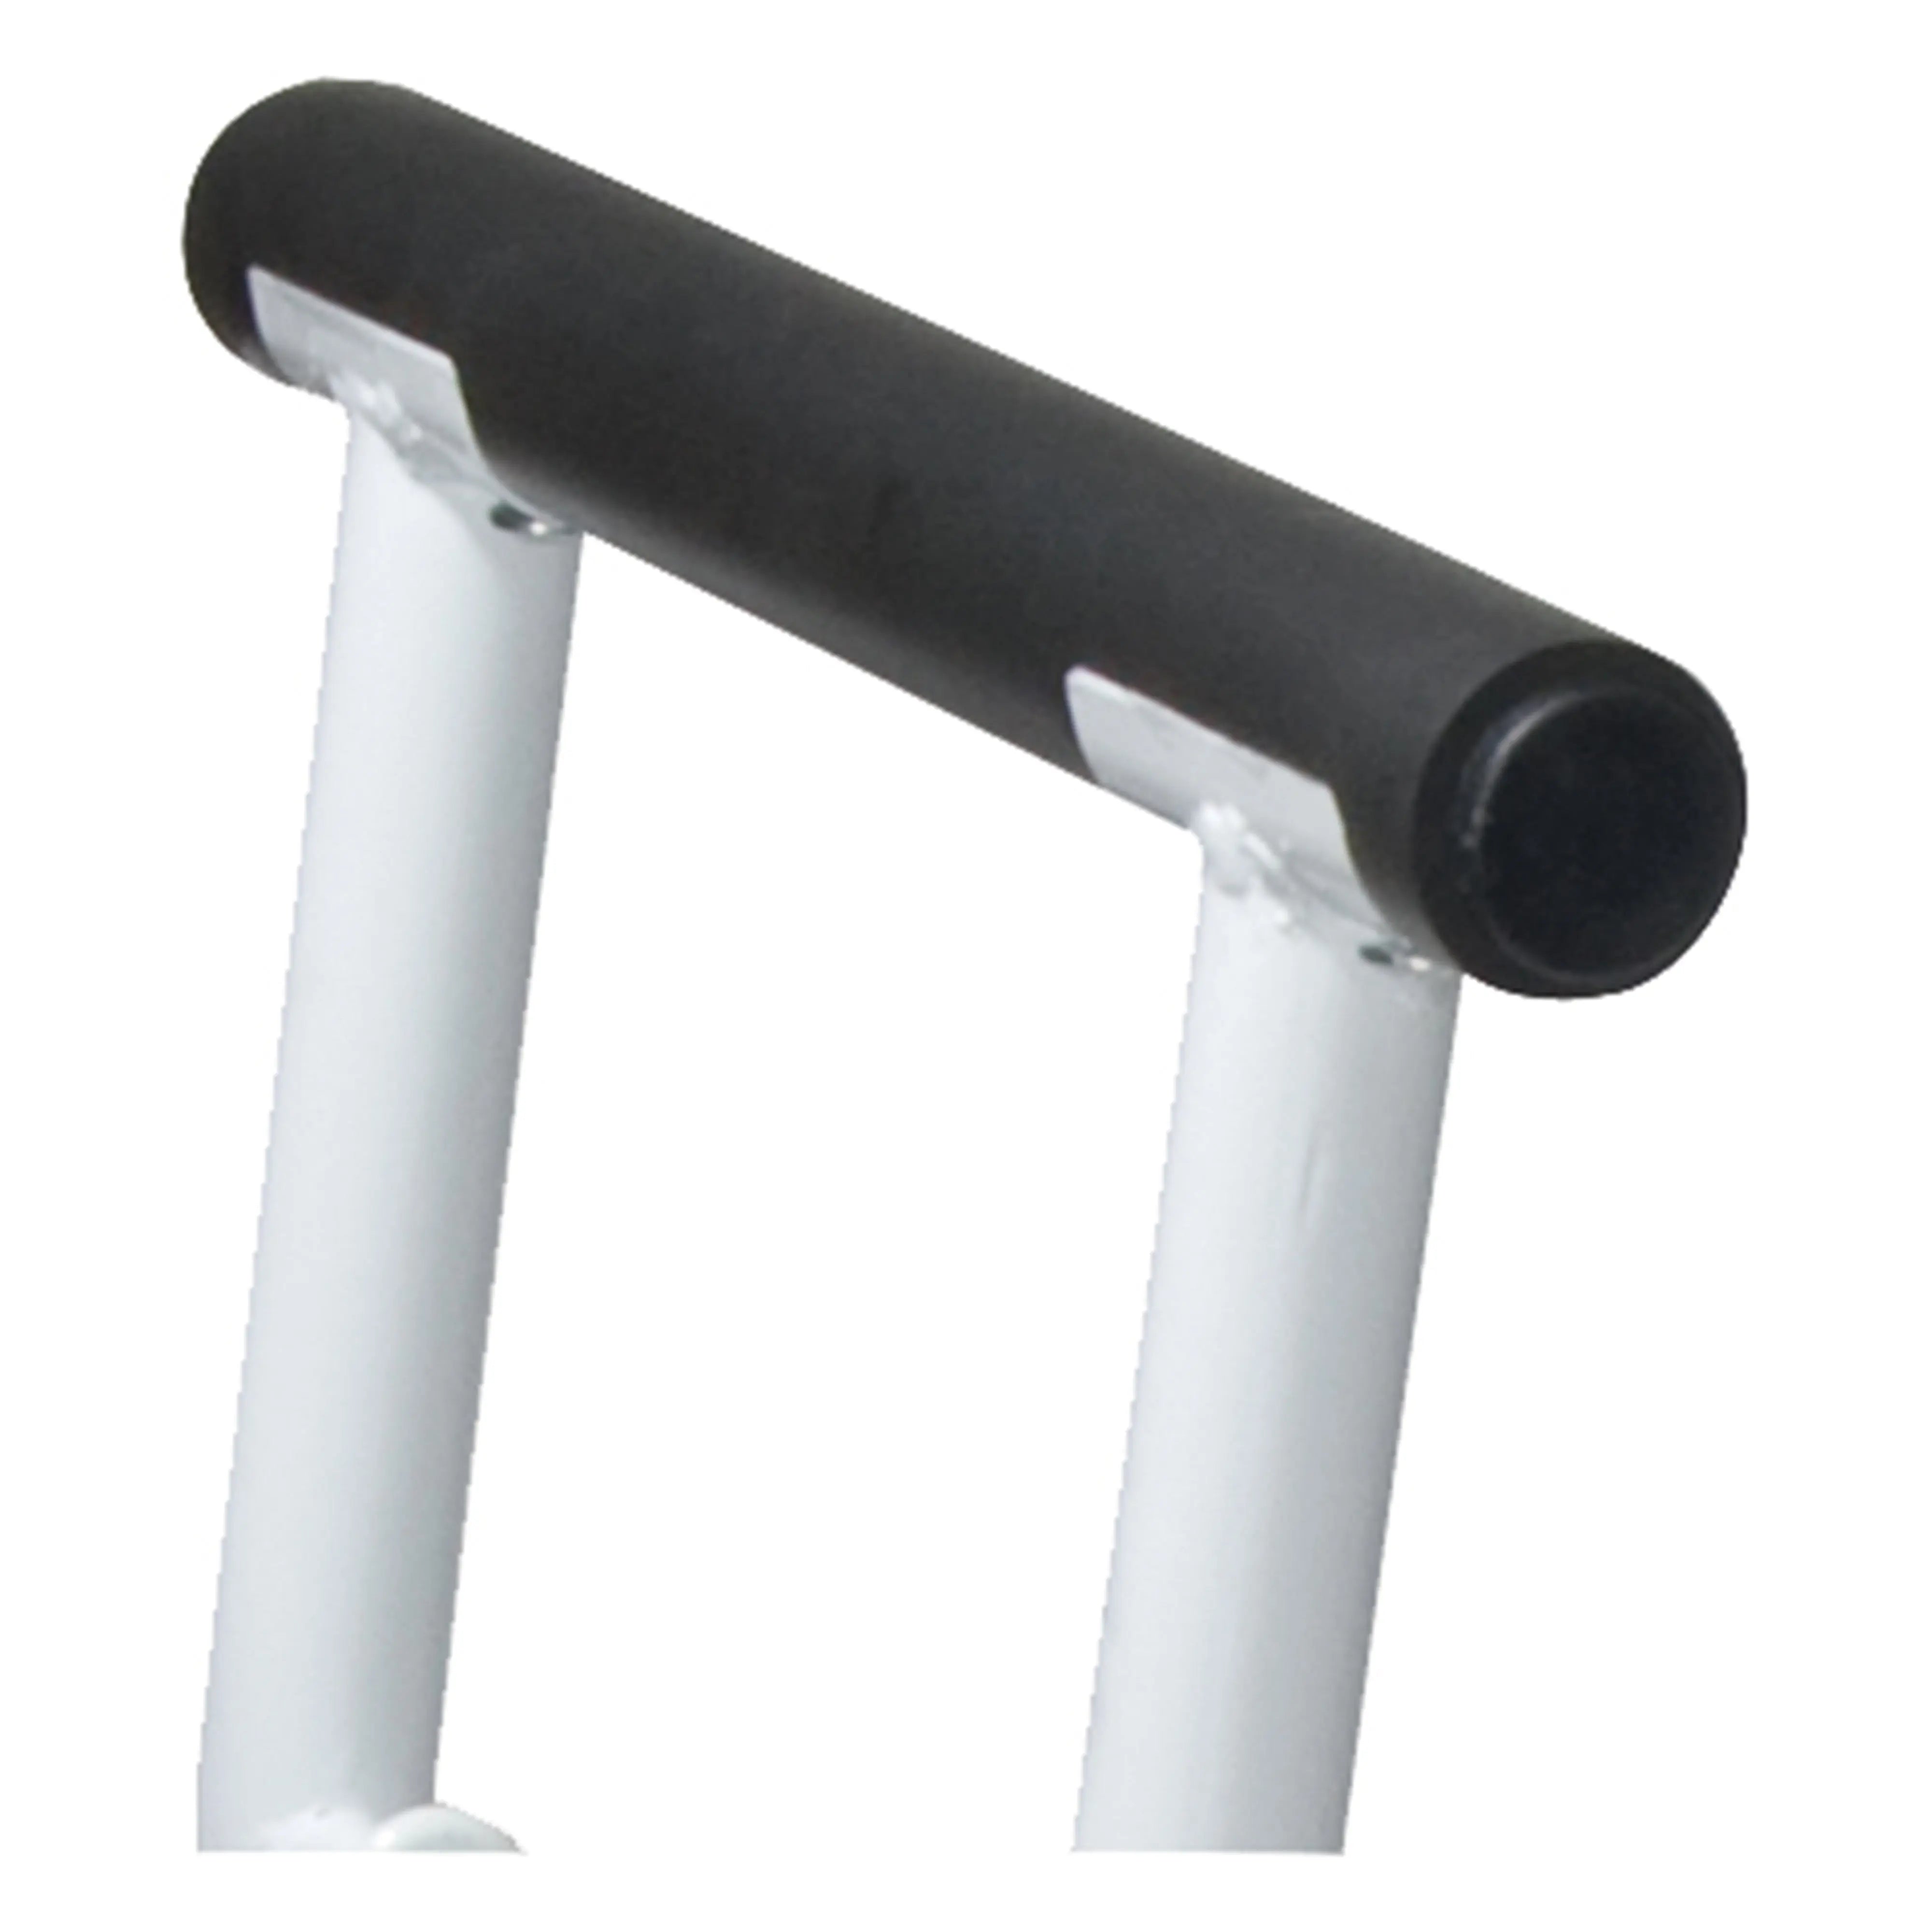 Stand Alone Toilet Safety Rail - Home Health Store Inc